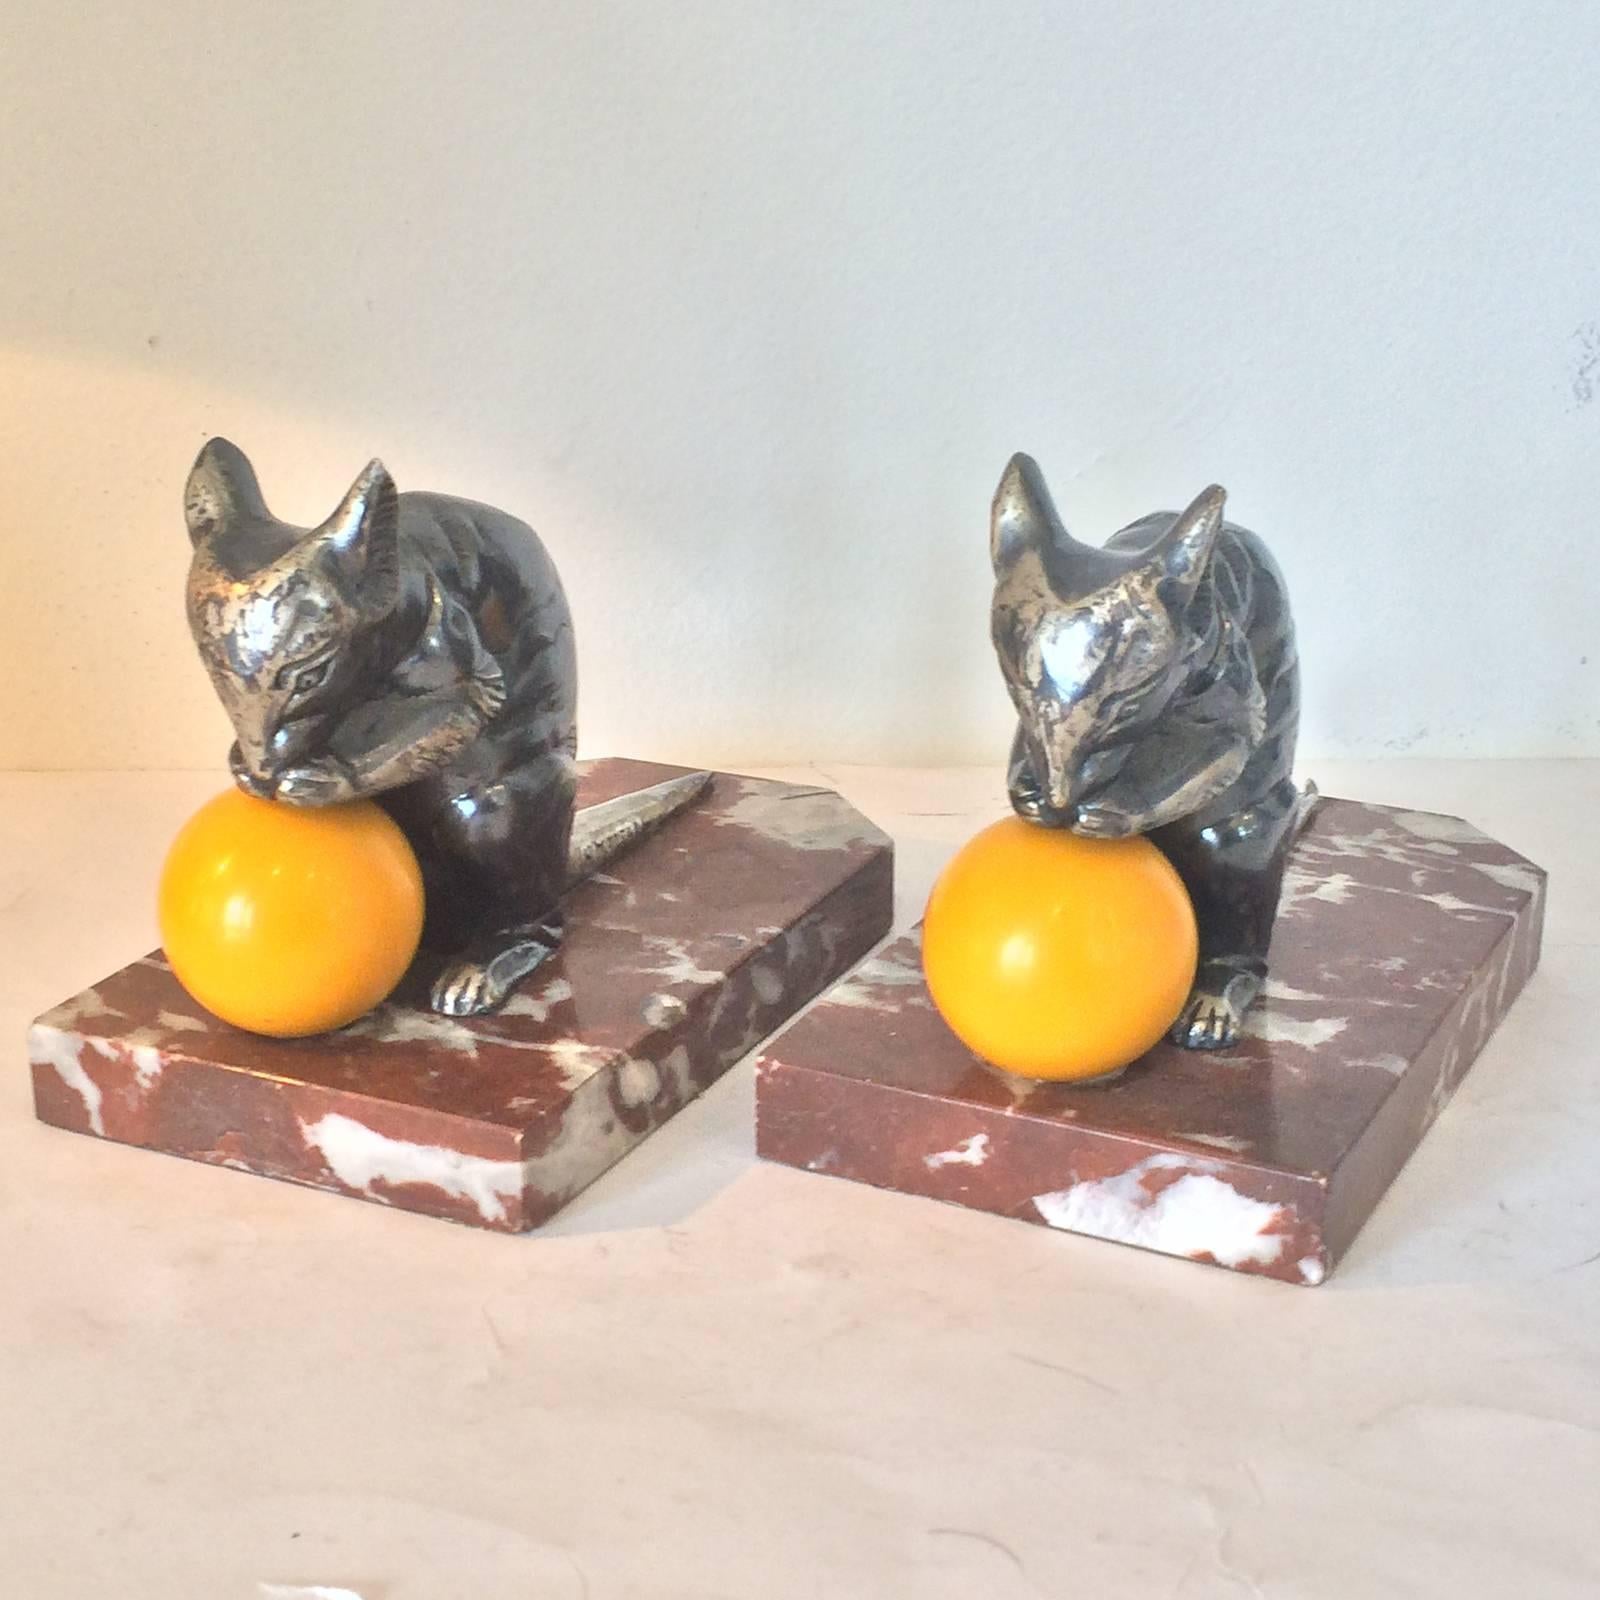 Art Deco bookends of Mice by H. Moreau with “Cheese” balls. Very rare design and both are signed to the left side of tail. Galalaith (French Bakelite) yellow balls all with excellent presentation, mounted of rouge and white veined marble with